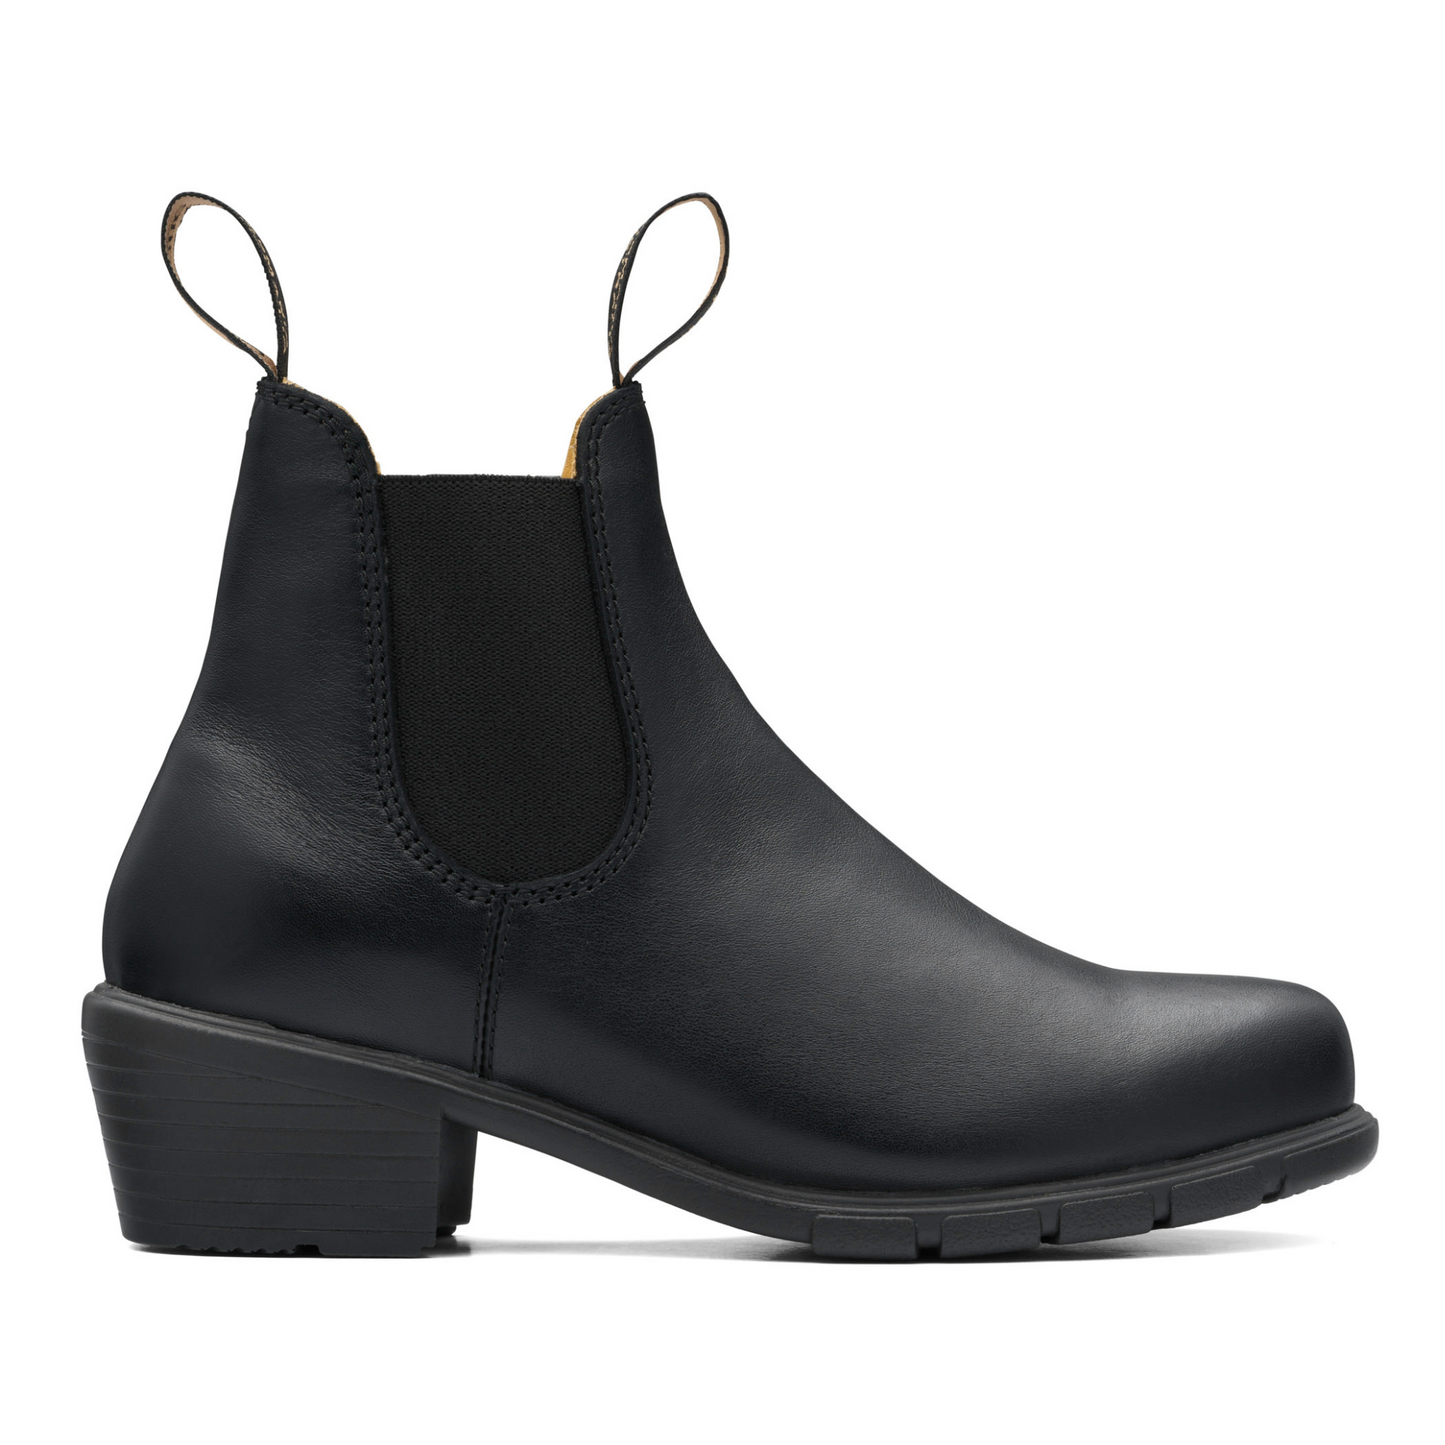 The profile view of the right boot. All black leather with a chunky heel on a black sole.